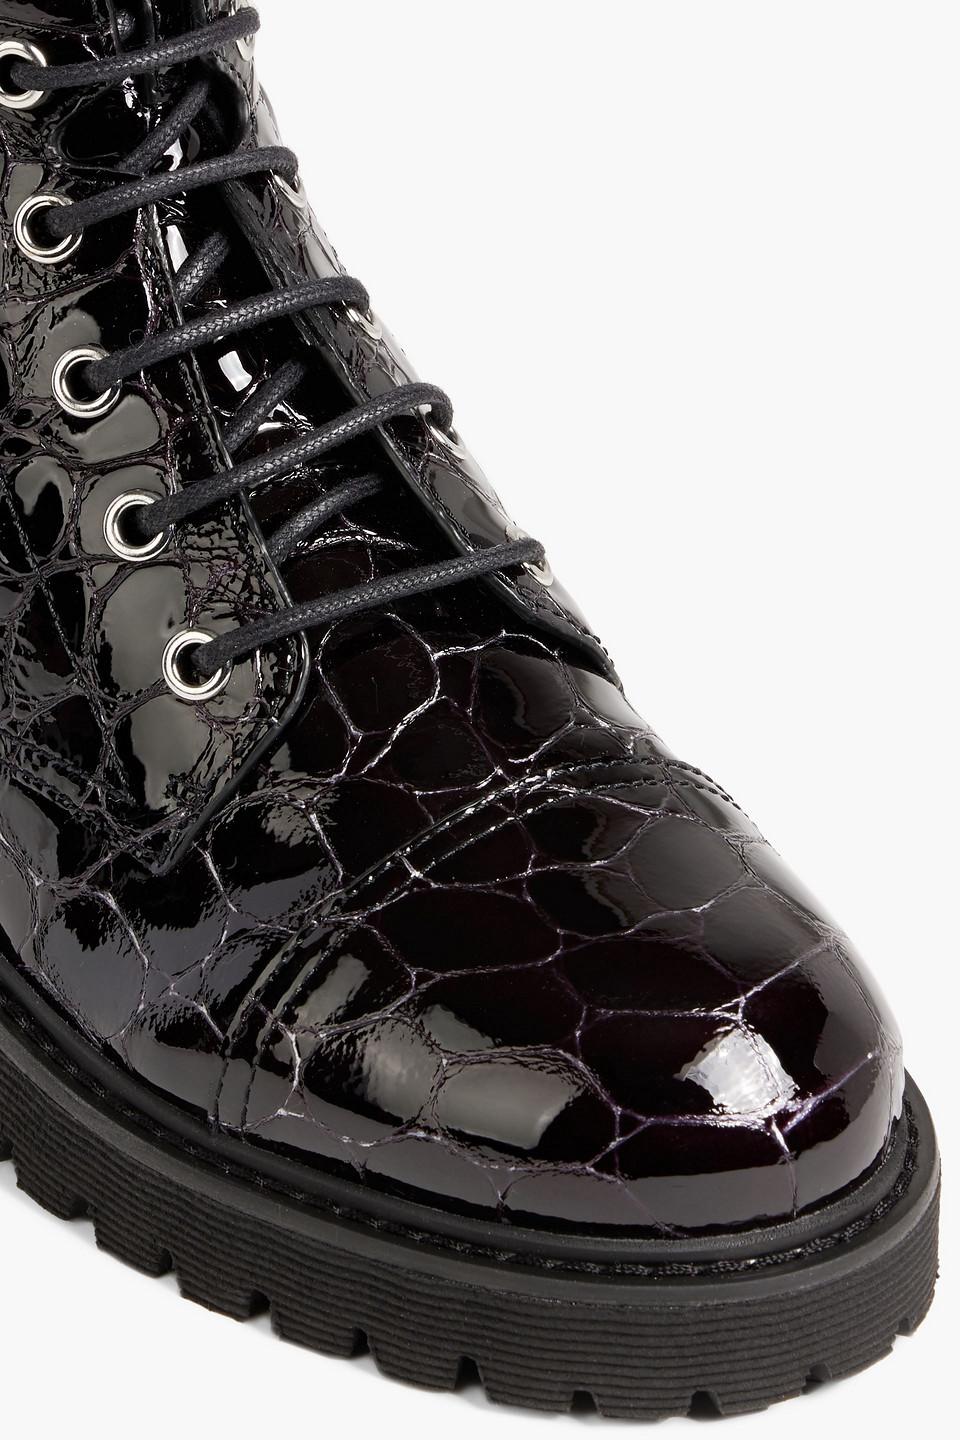 Giuseppe Zanotti Thora Croc-effect Patent-leather Combat Boots in Black |  Lyst